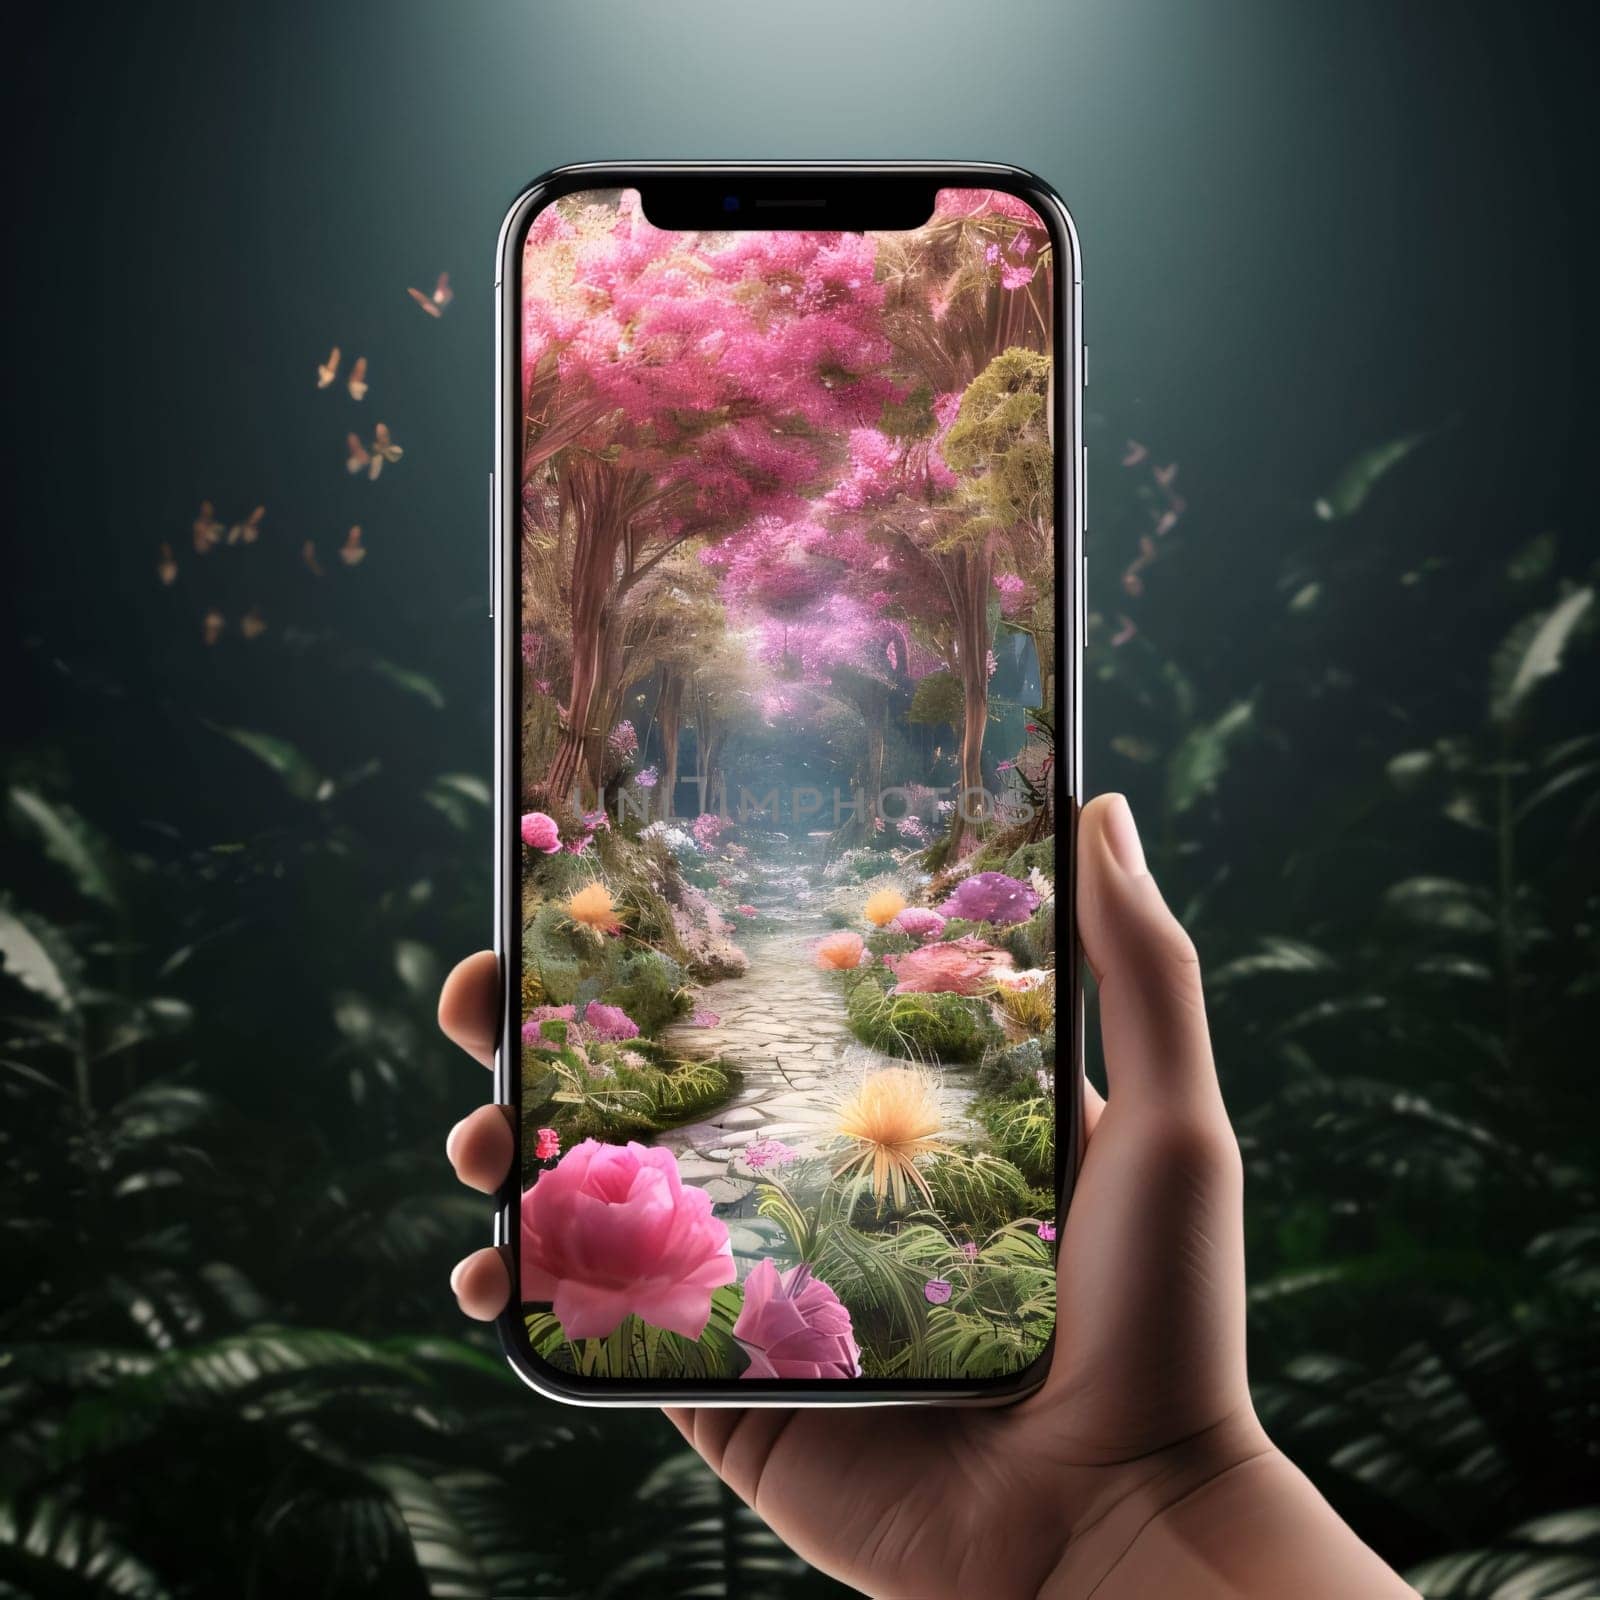 Smartphone screen held in hand with camera, path with Flowers nature. Flowering flowers, a symbol of spring, new life. A joyful time of nature waking up to life.